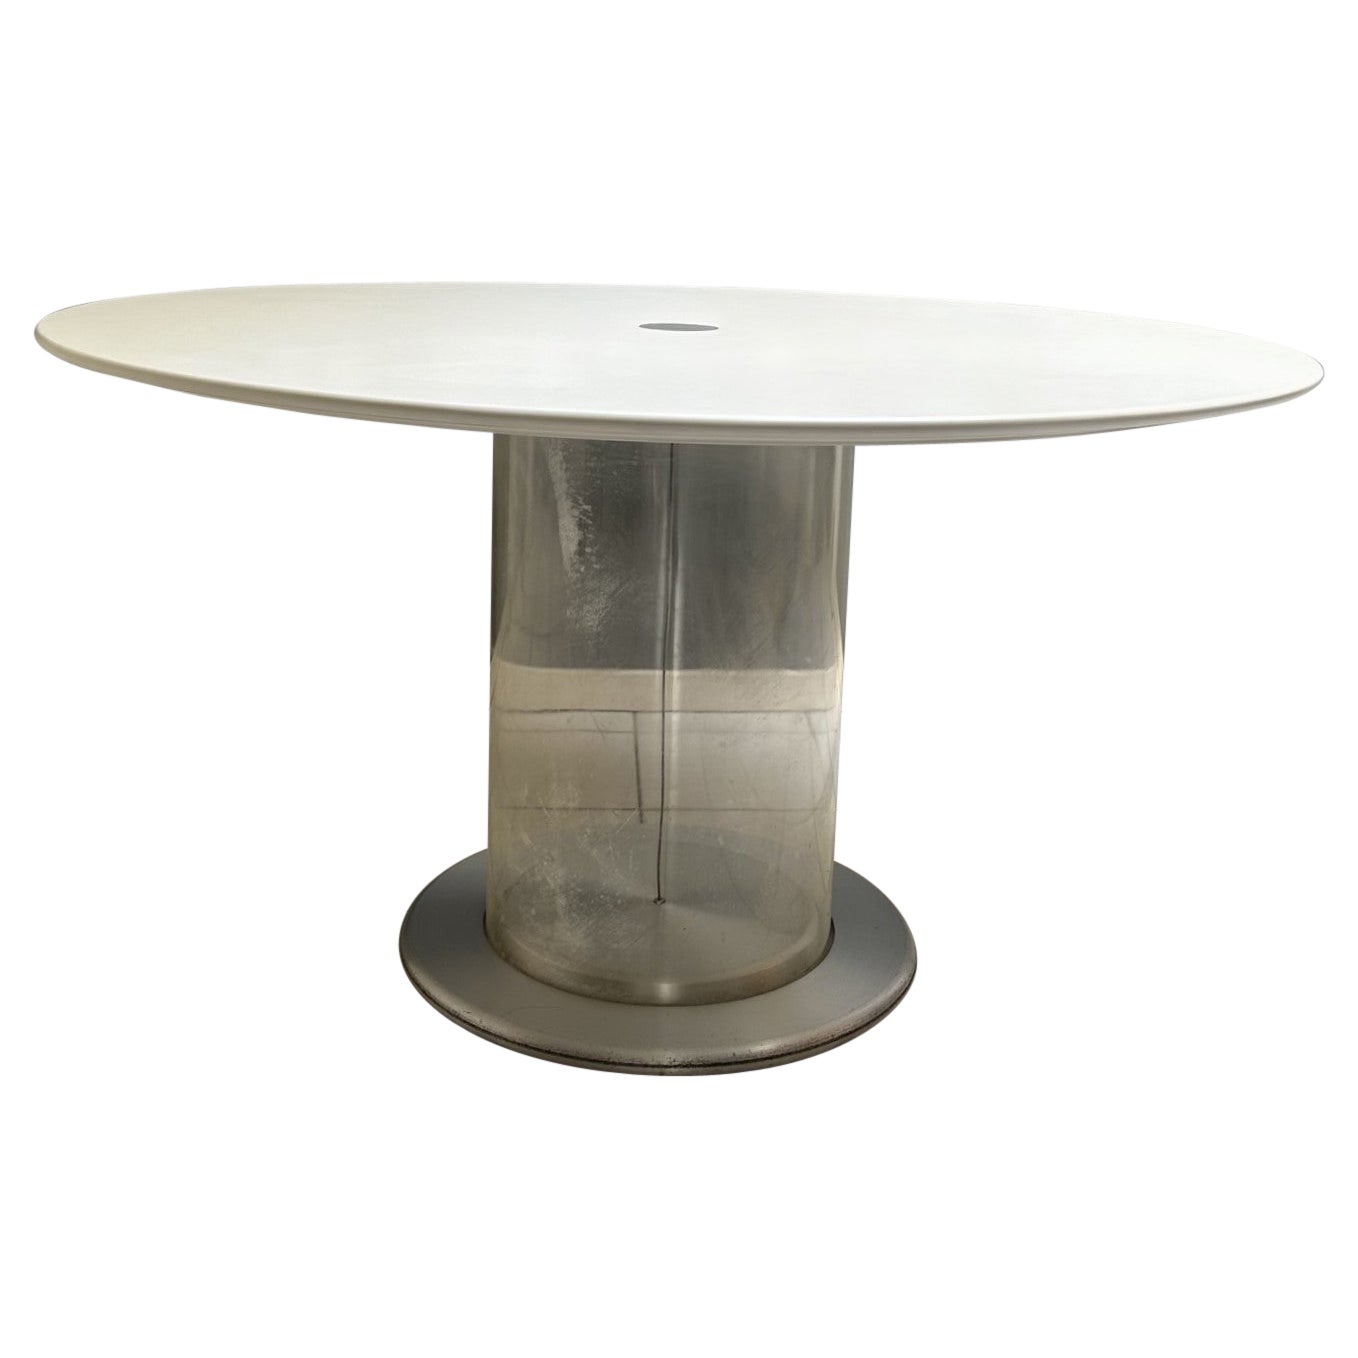 19thMid-Century Modern, round Eclissi Table, by Claudio Salocchi, white wood top